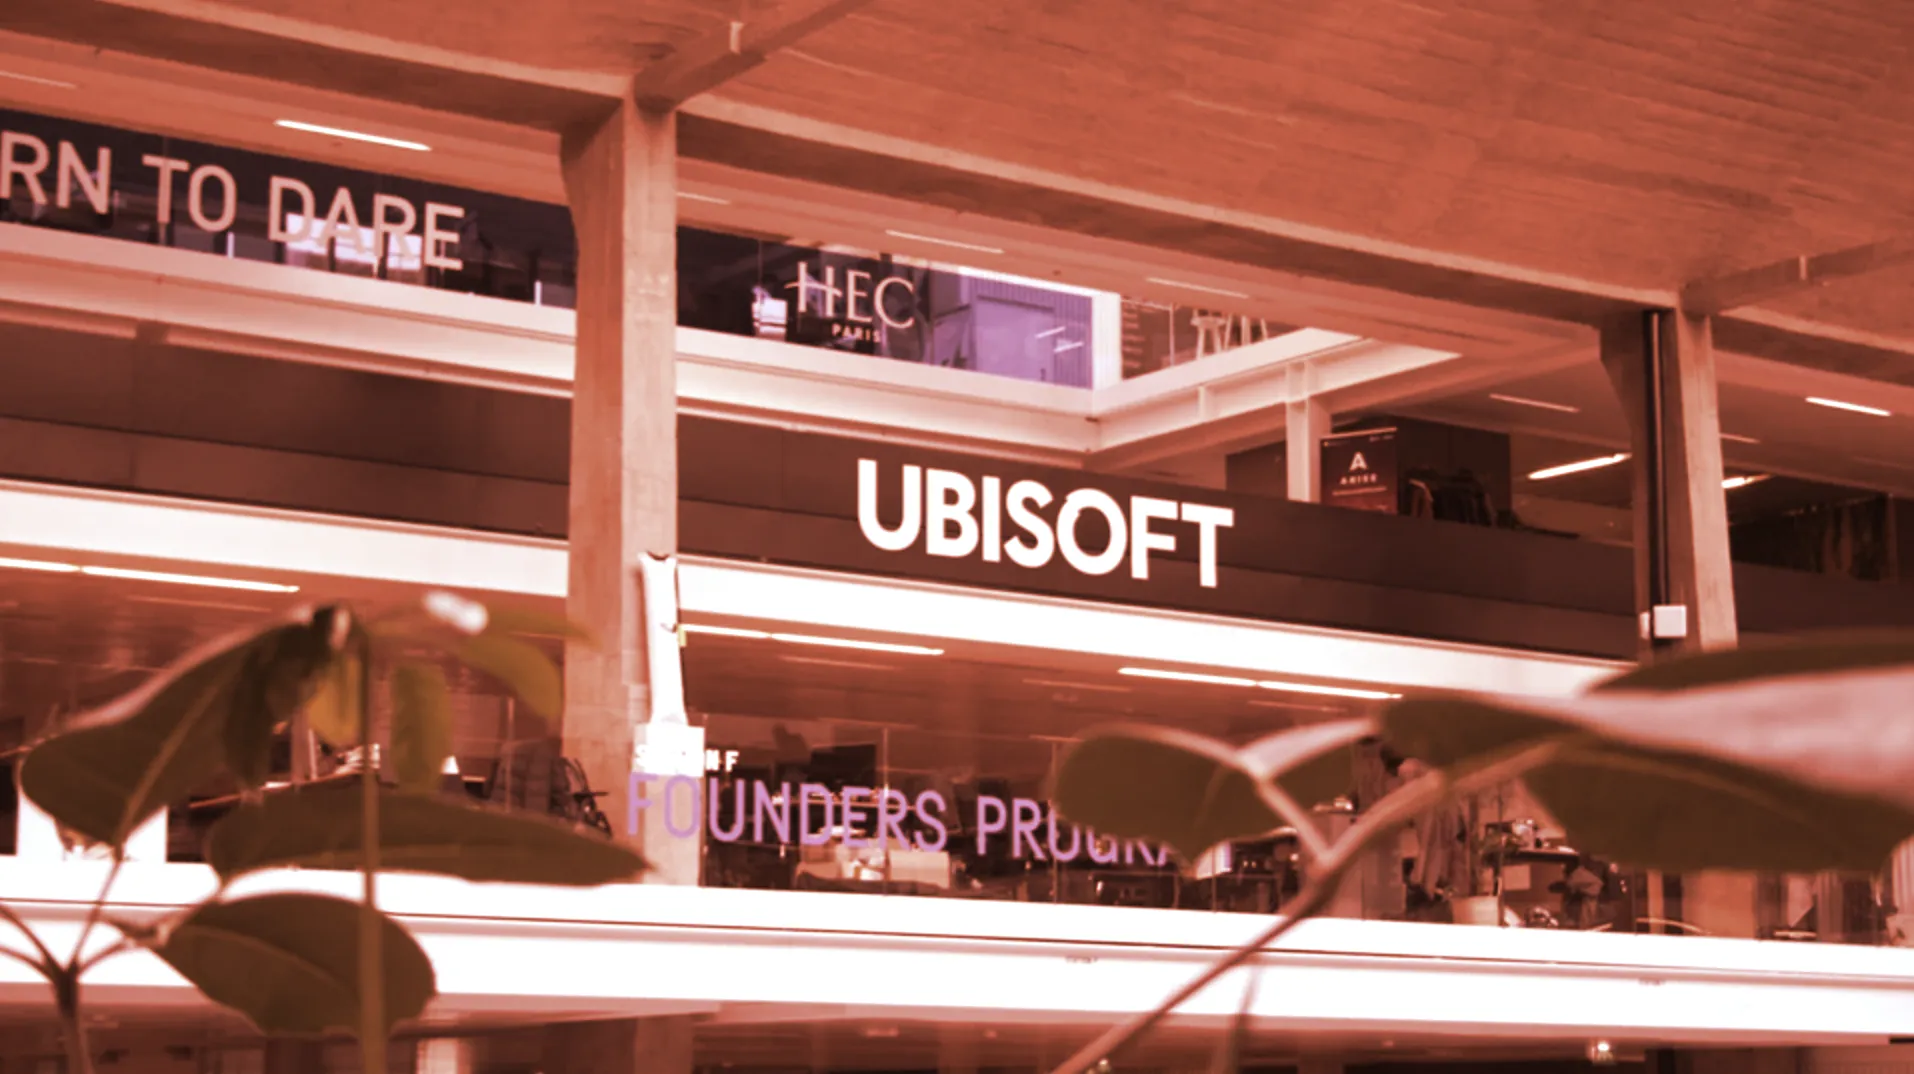 Ubisoft is game publisher behind hit titles such as Assassins Creed. Image: Ubisoft